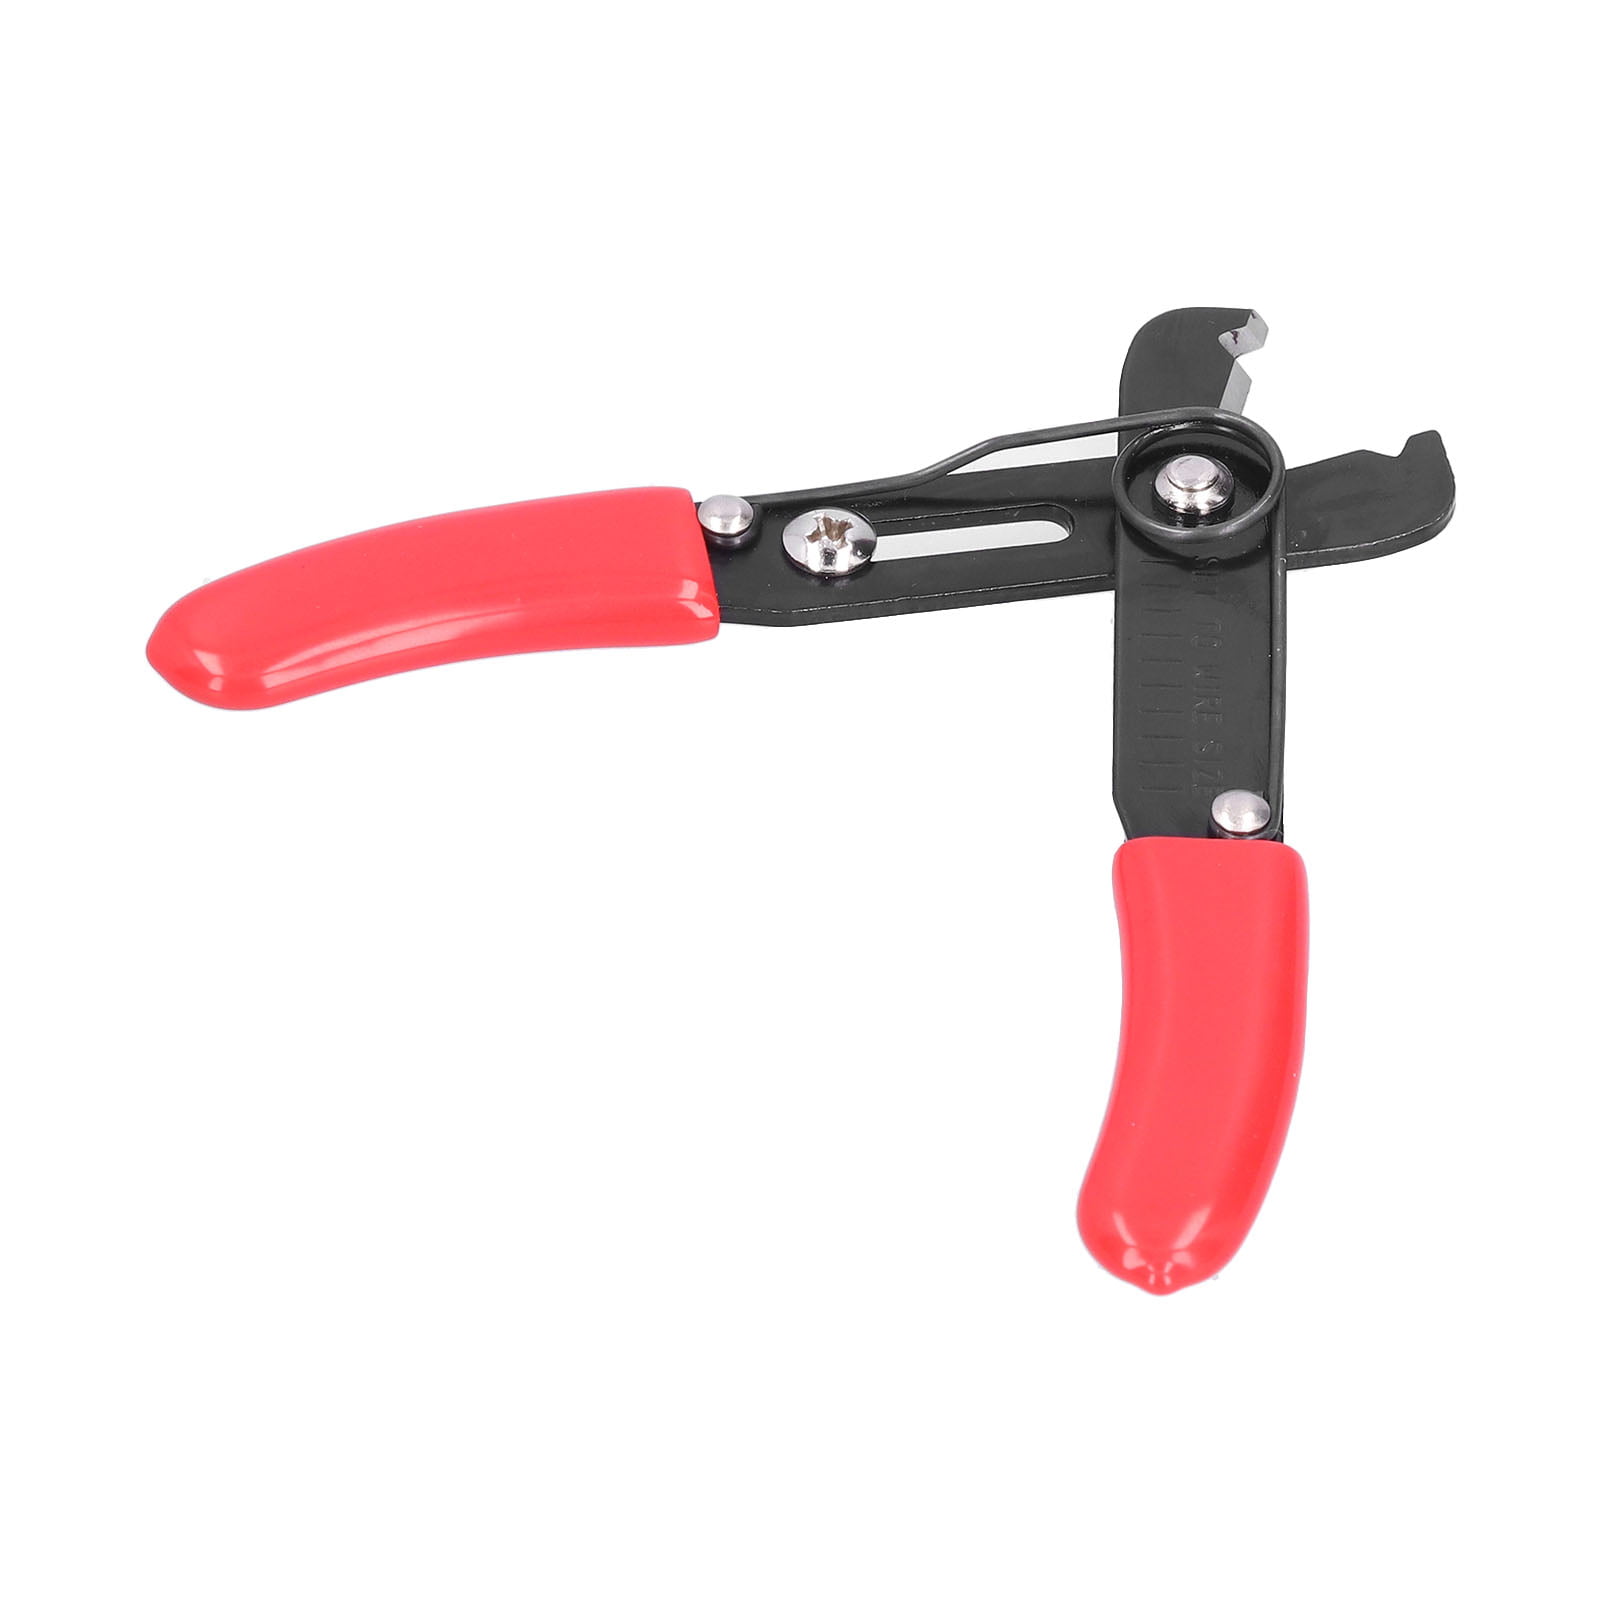 Ymiko Wire Cutter,Hardware,Cable Wire Stripper Tool 0.08‑6mm² Manual Industrial Hardware YF‑008 - Walmart.com